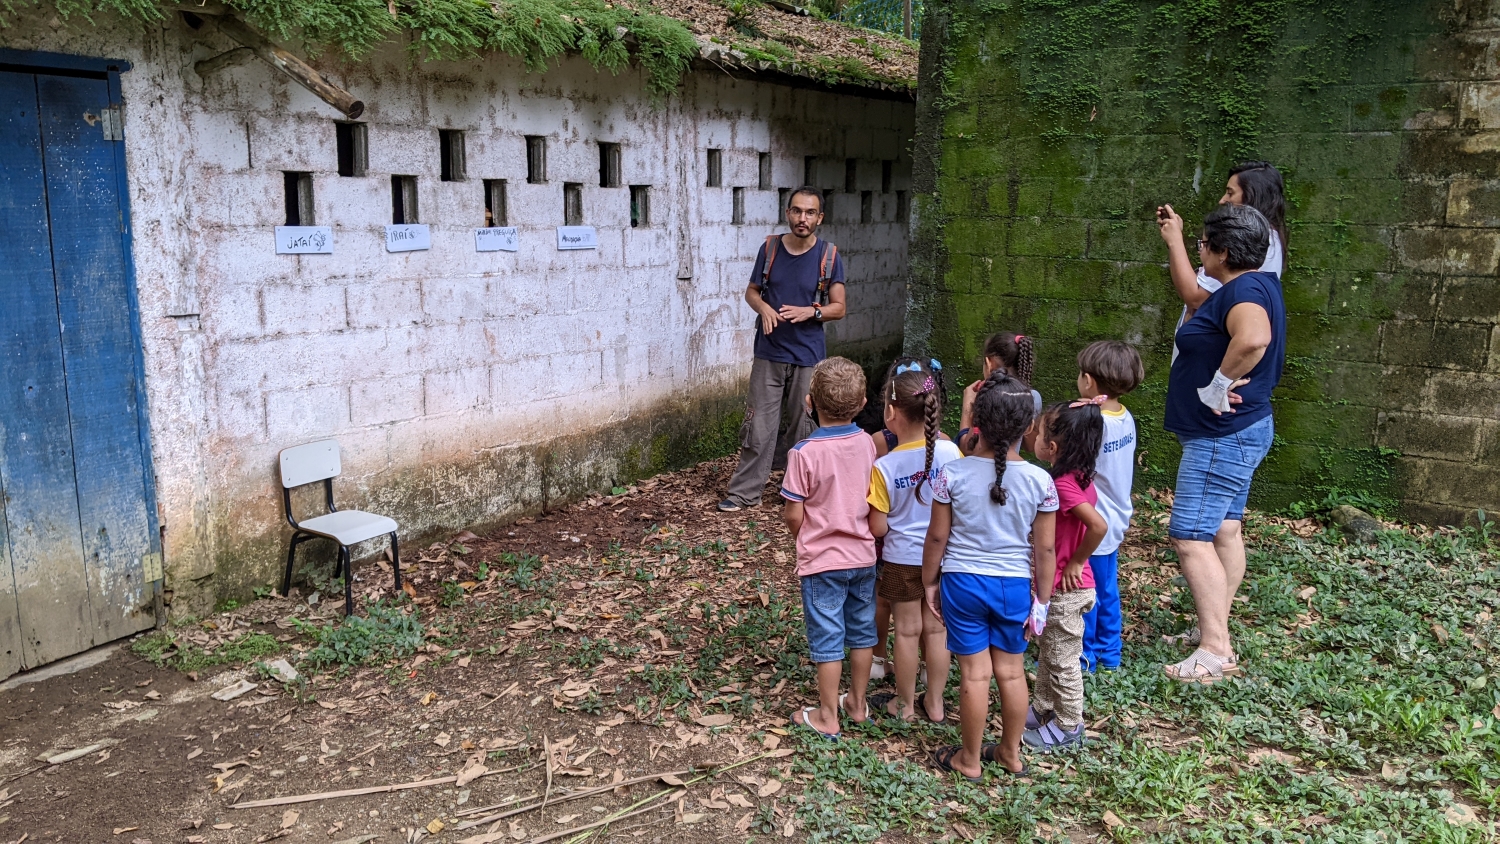 Roberto stands next to moss and mildew covered walls in front of a group of children and their two teachers. The walls of the community center have holes for windows where five different bee hives have been placed, with signs underneath reading jataí, iraí, mirim preguiça, and mandaçaia (types of native bees)